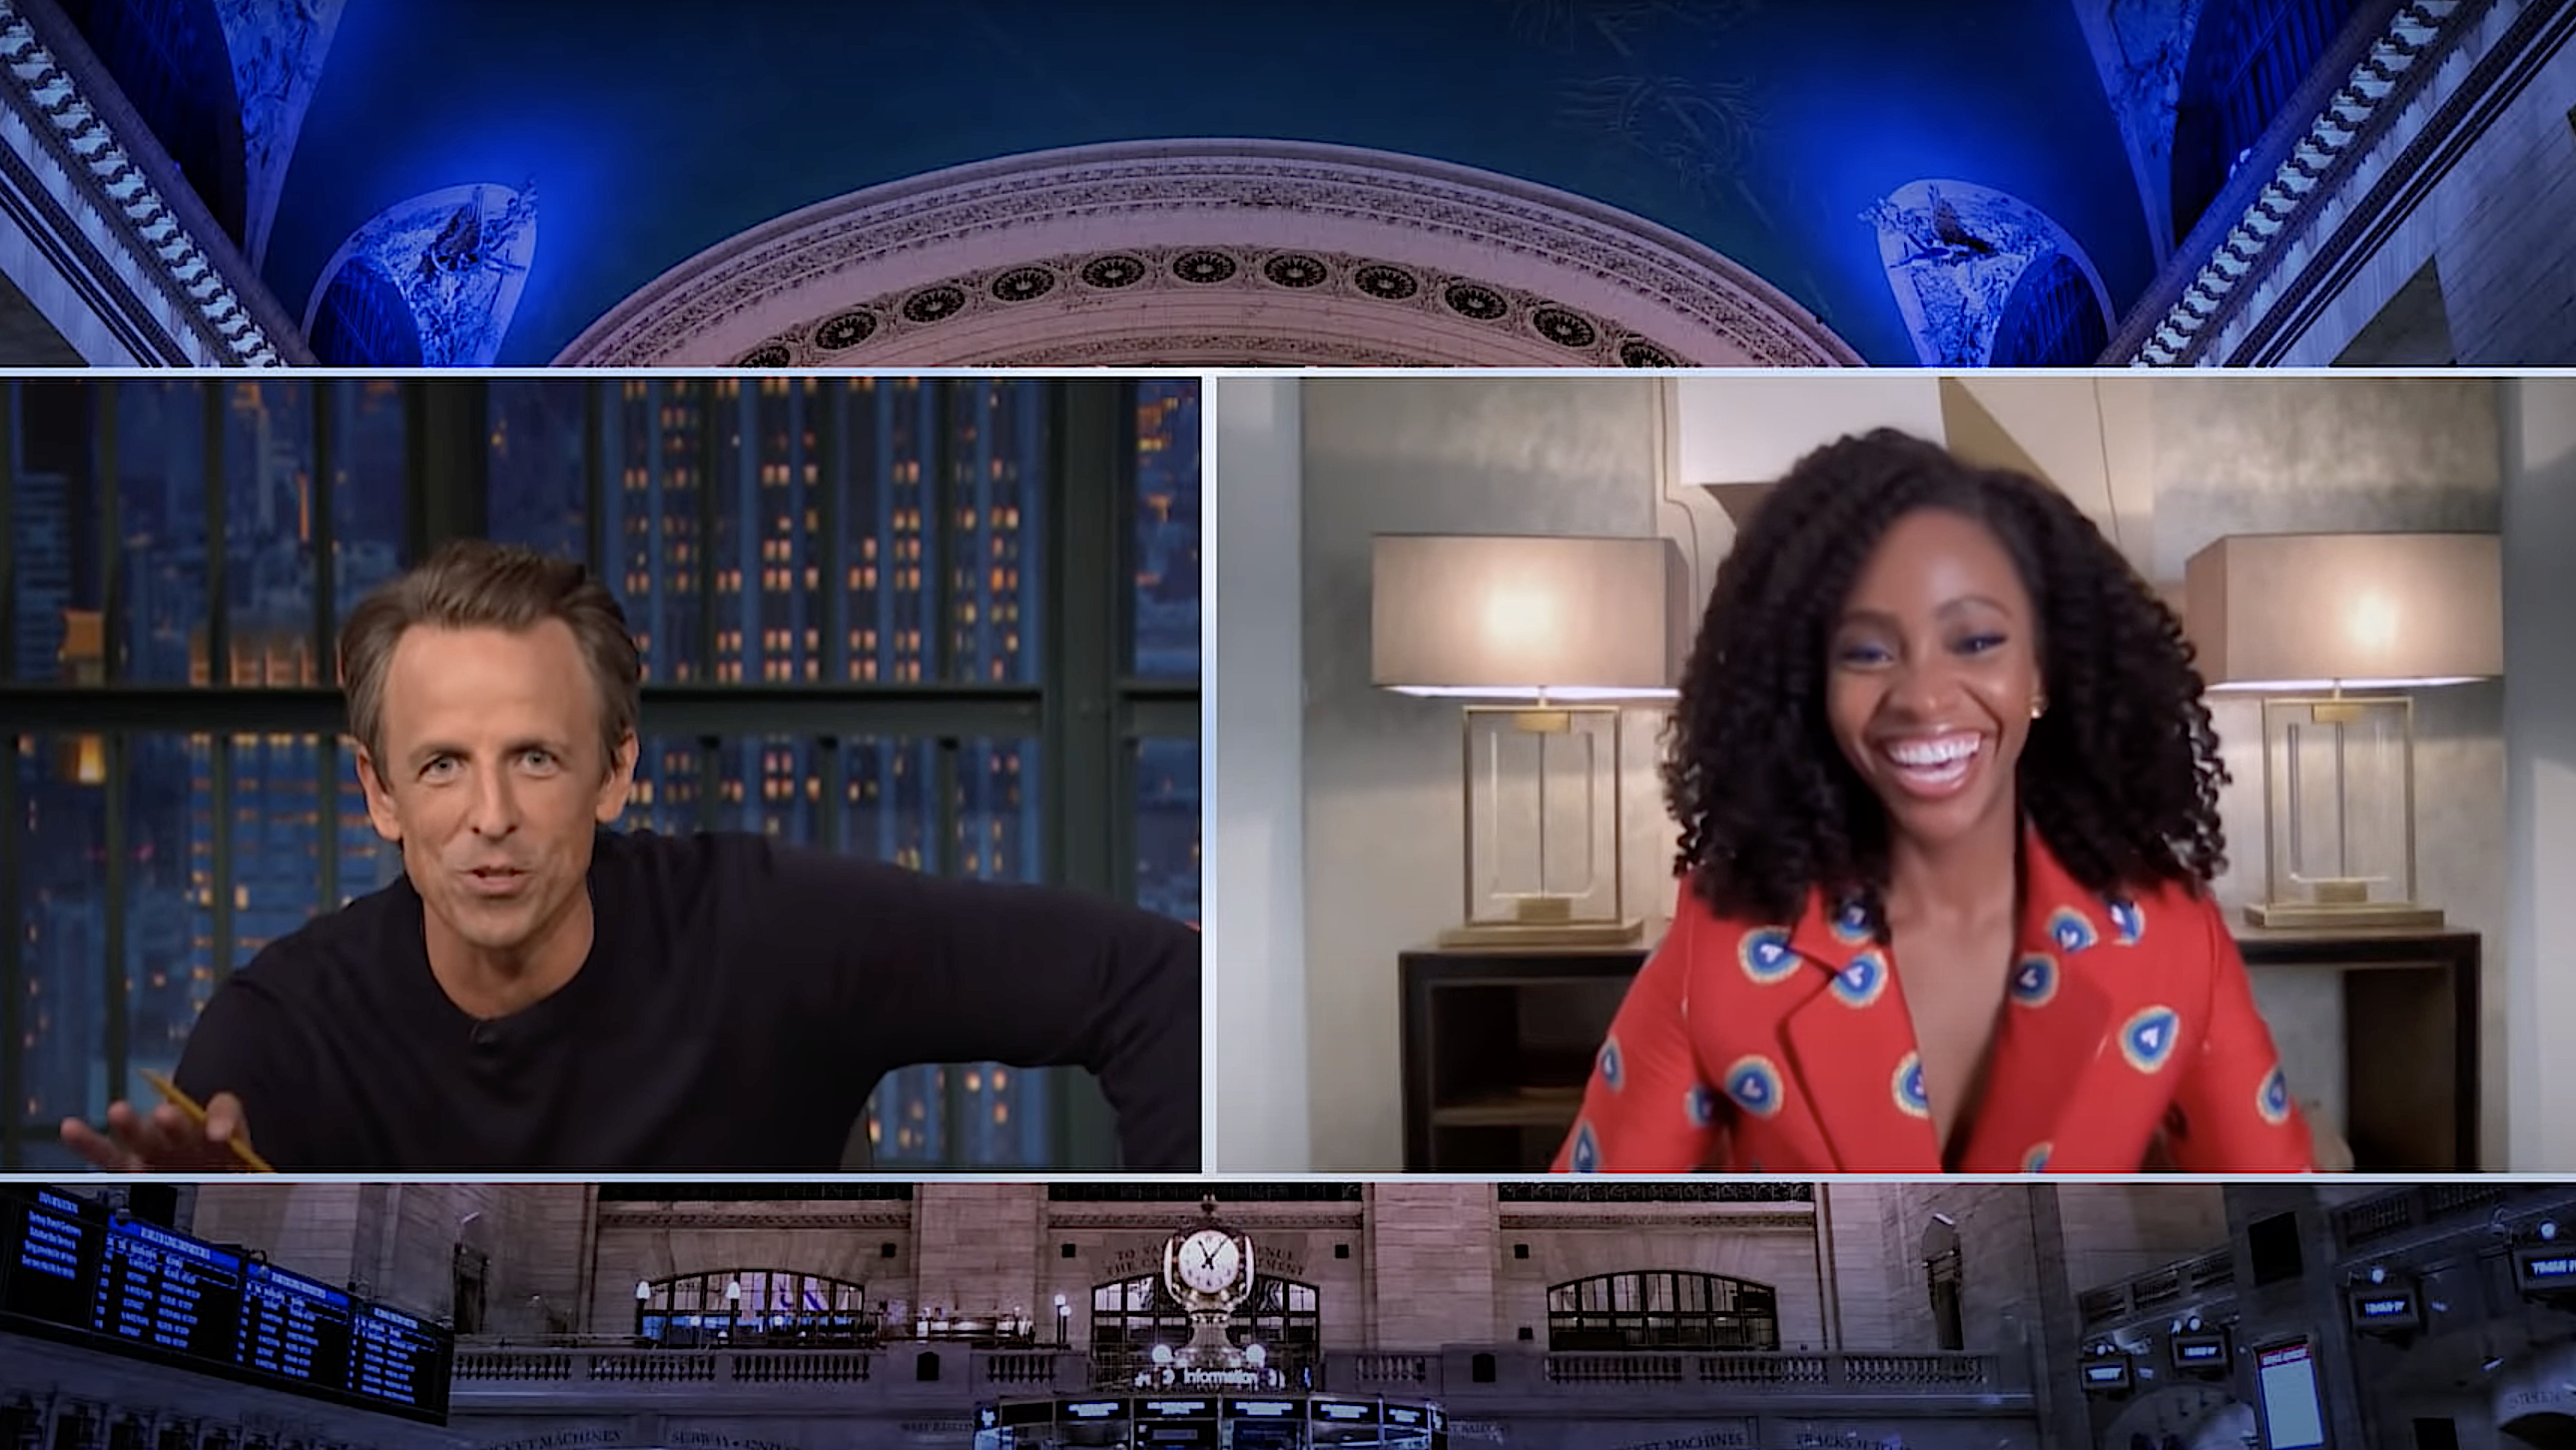 On Late Night, Teyonah Parris isn’t going to say Candyman five times, just in case